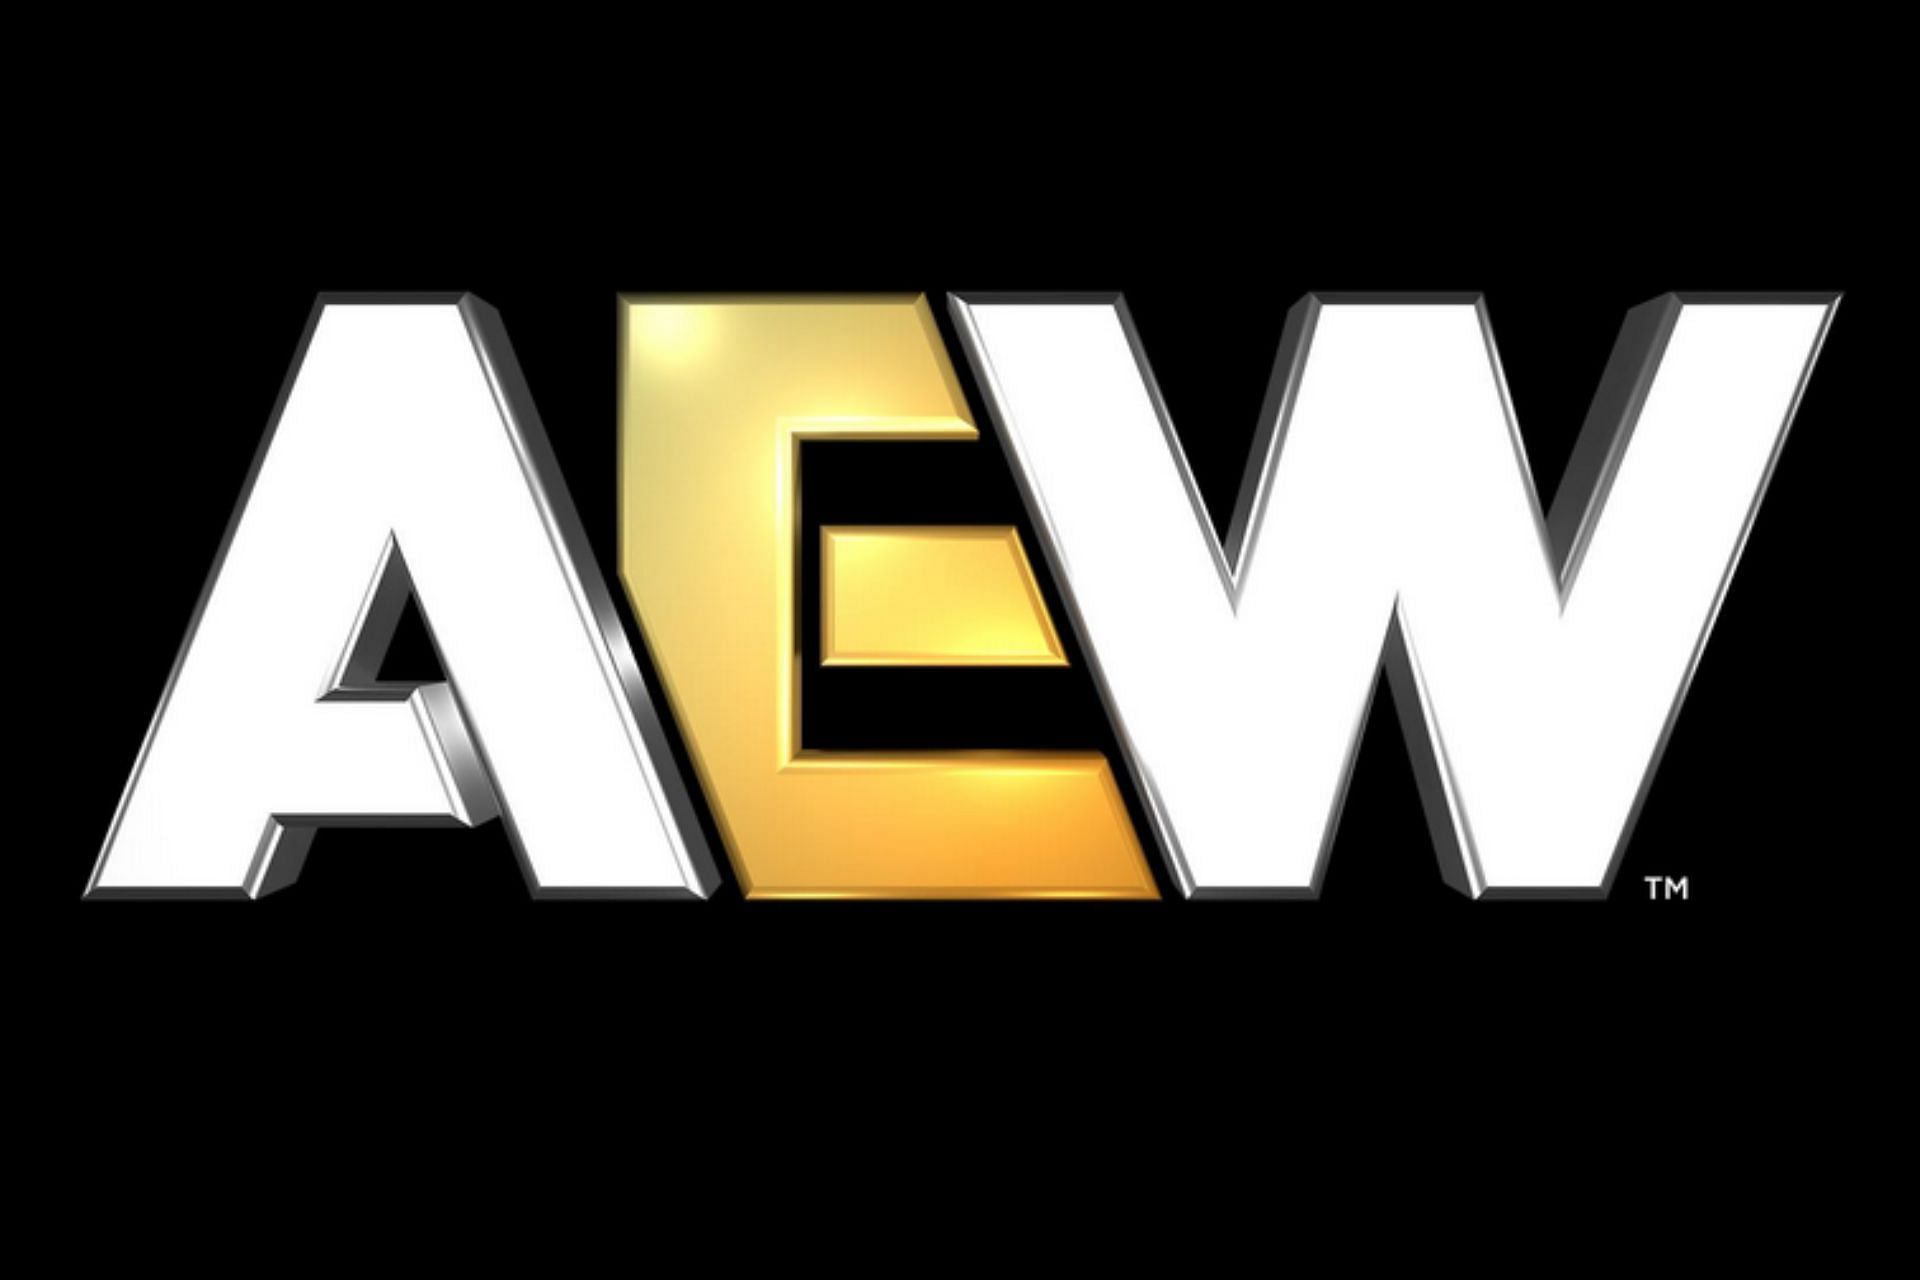 Who could be the first inductee to the AEW Hall of Fame if it begins? An AEW Wrestler speaks